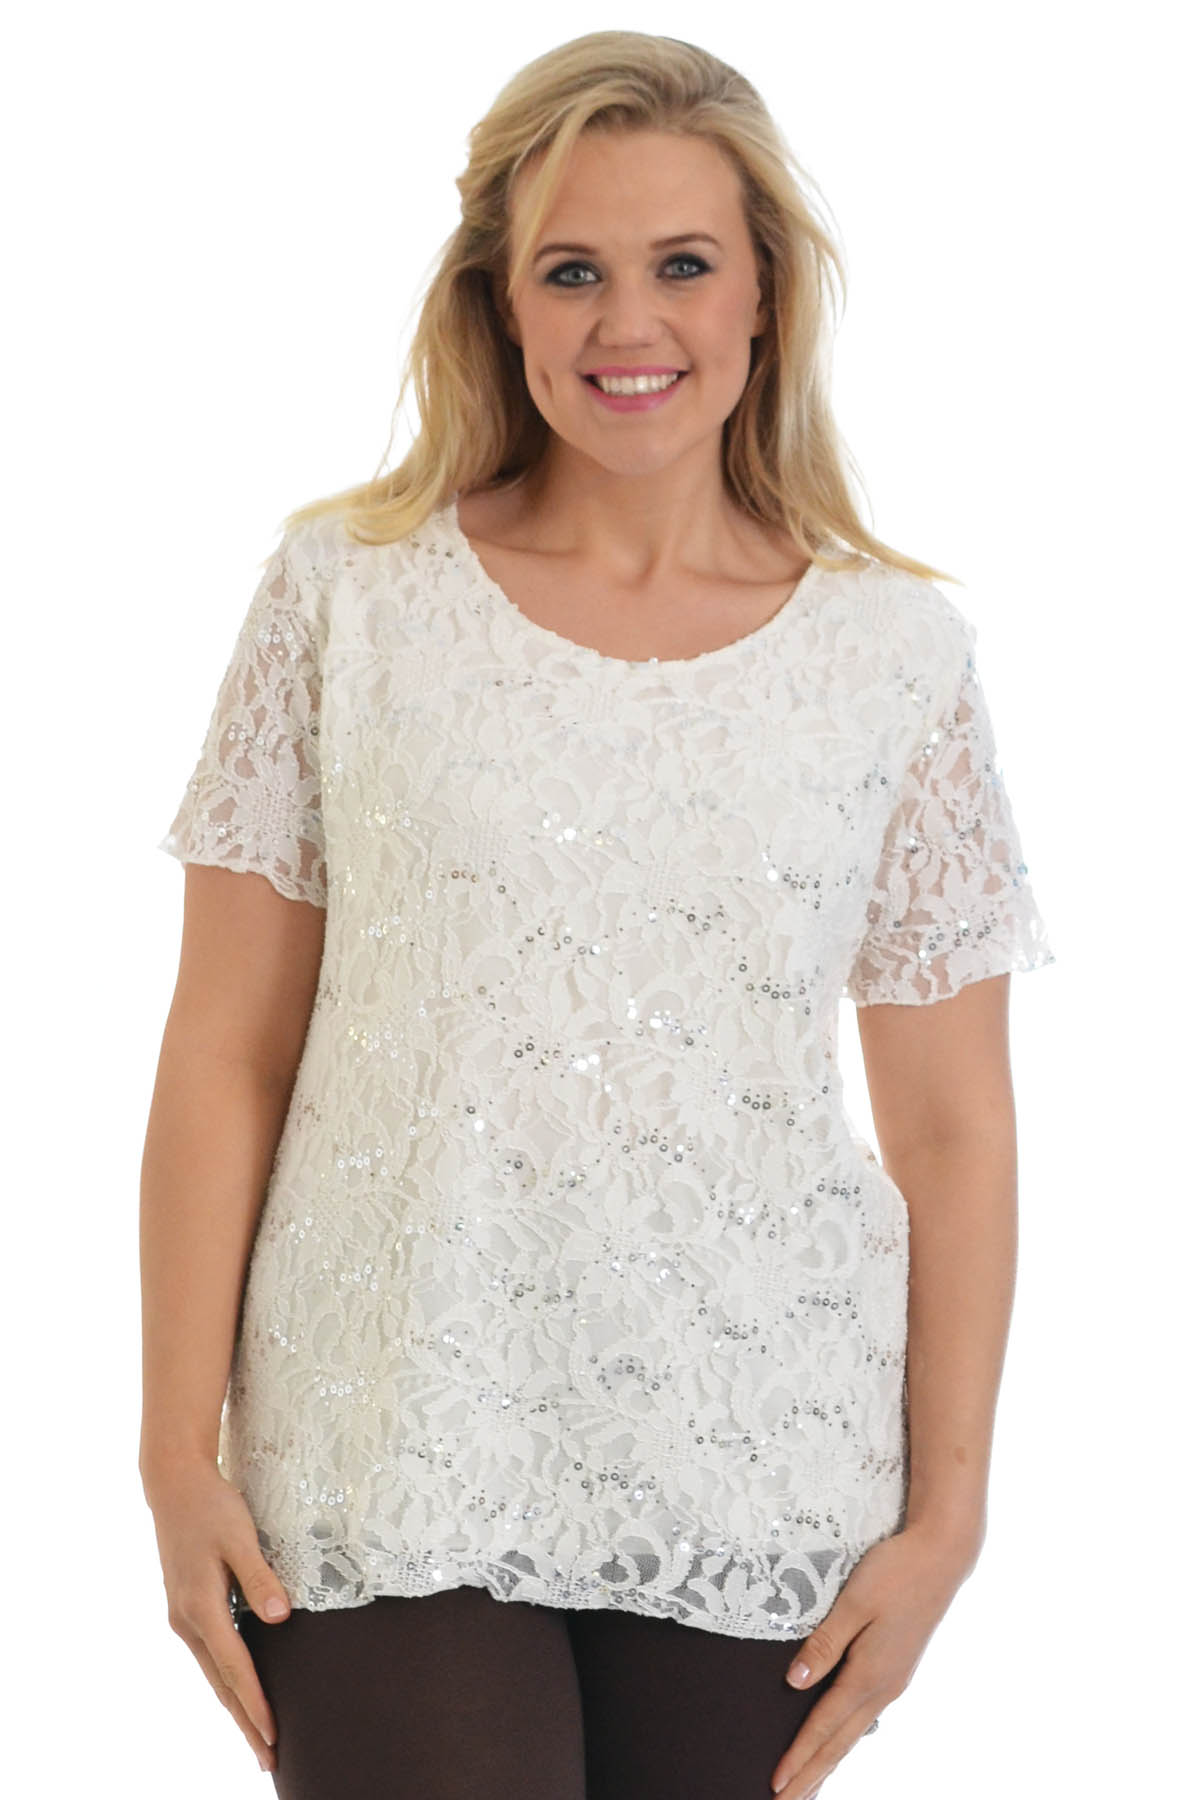 New Womens Top Plus Size Ladies Shirt Tunic Floral Lace Sequins Party ...